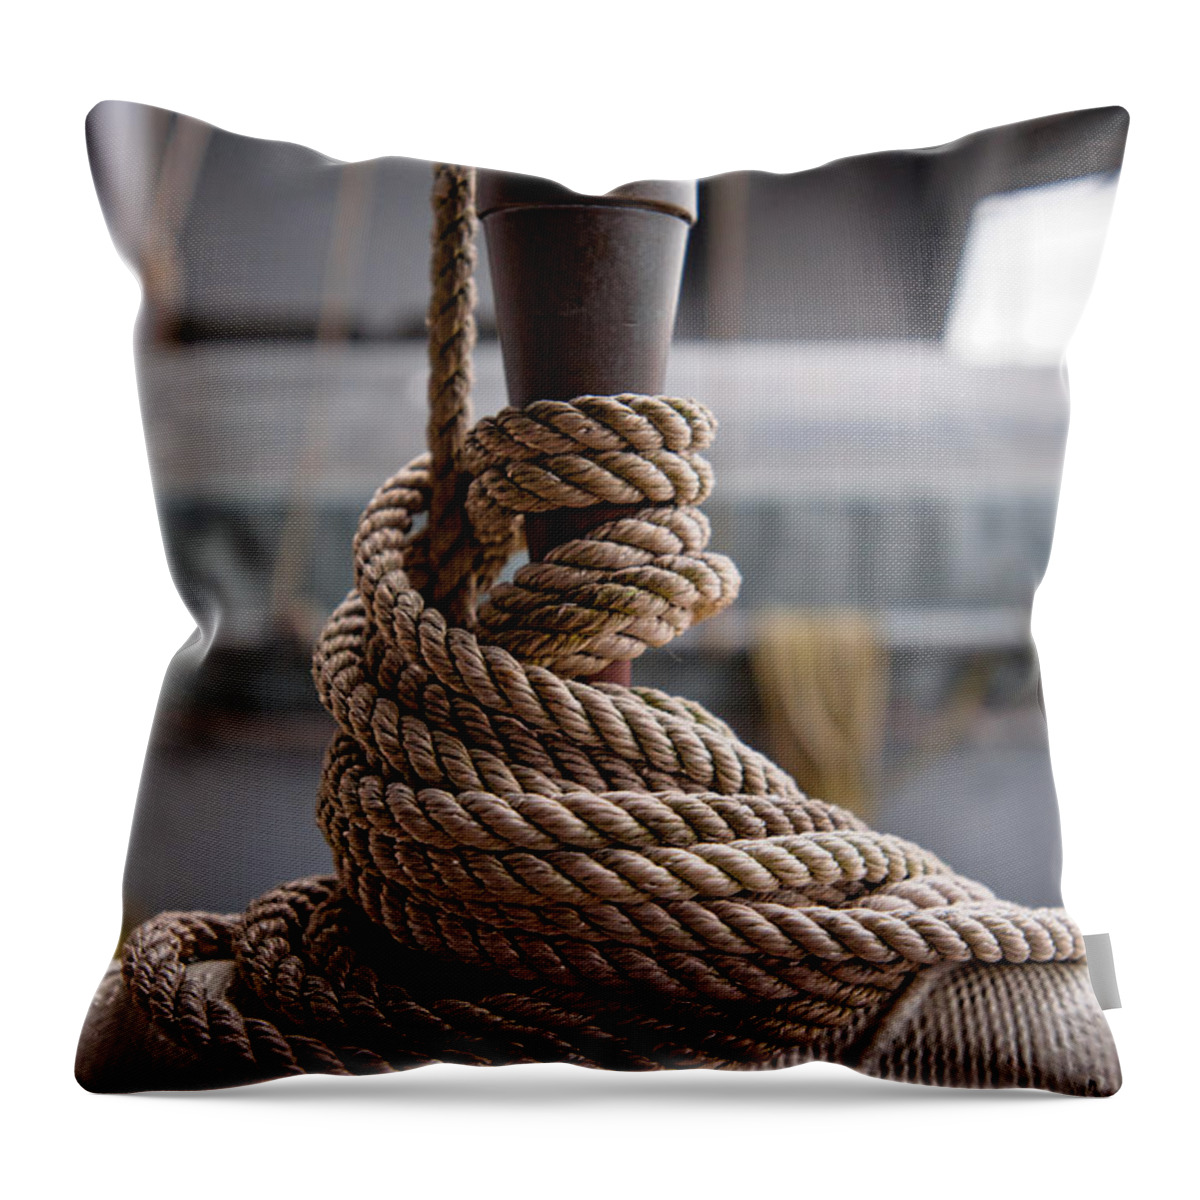 Uss Wisconsin Throw Pillow featuring the photograph Secured Coils by Christopher Holmes